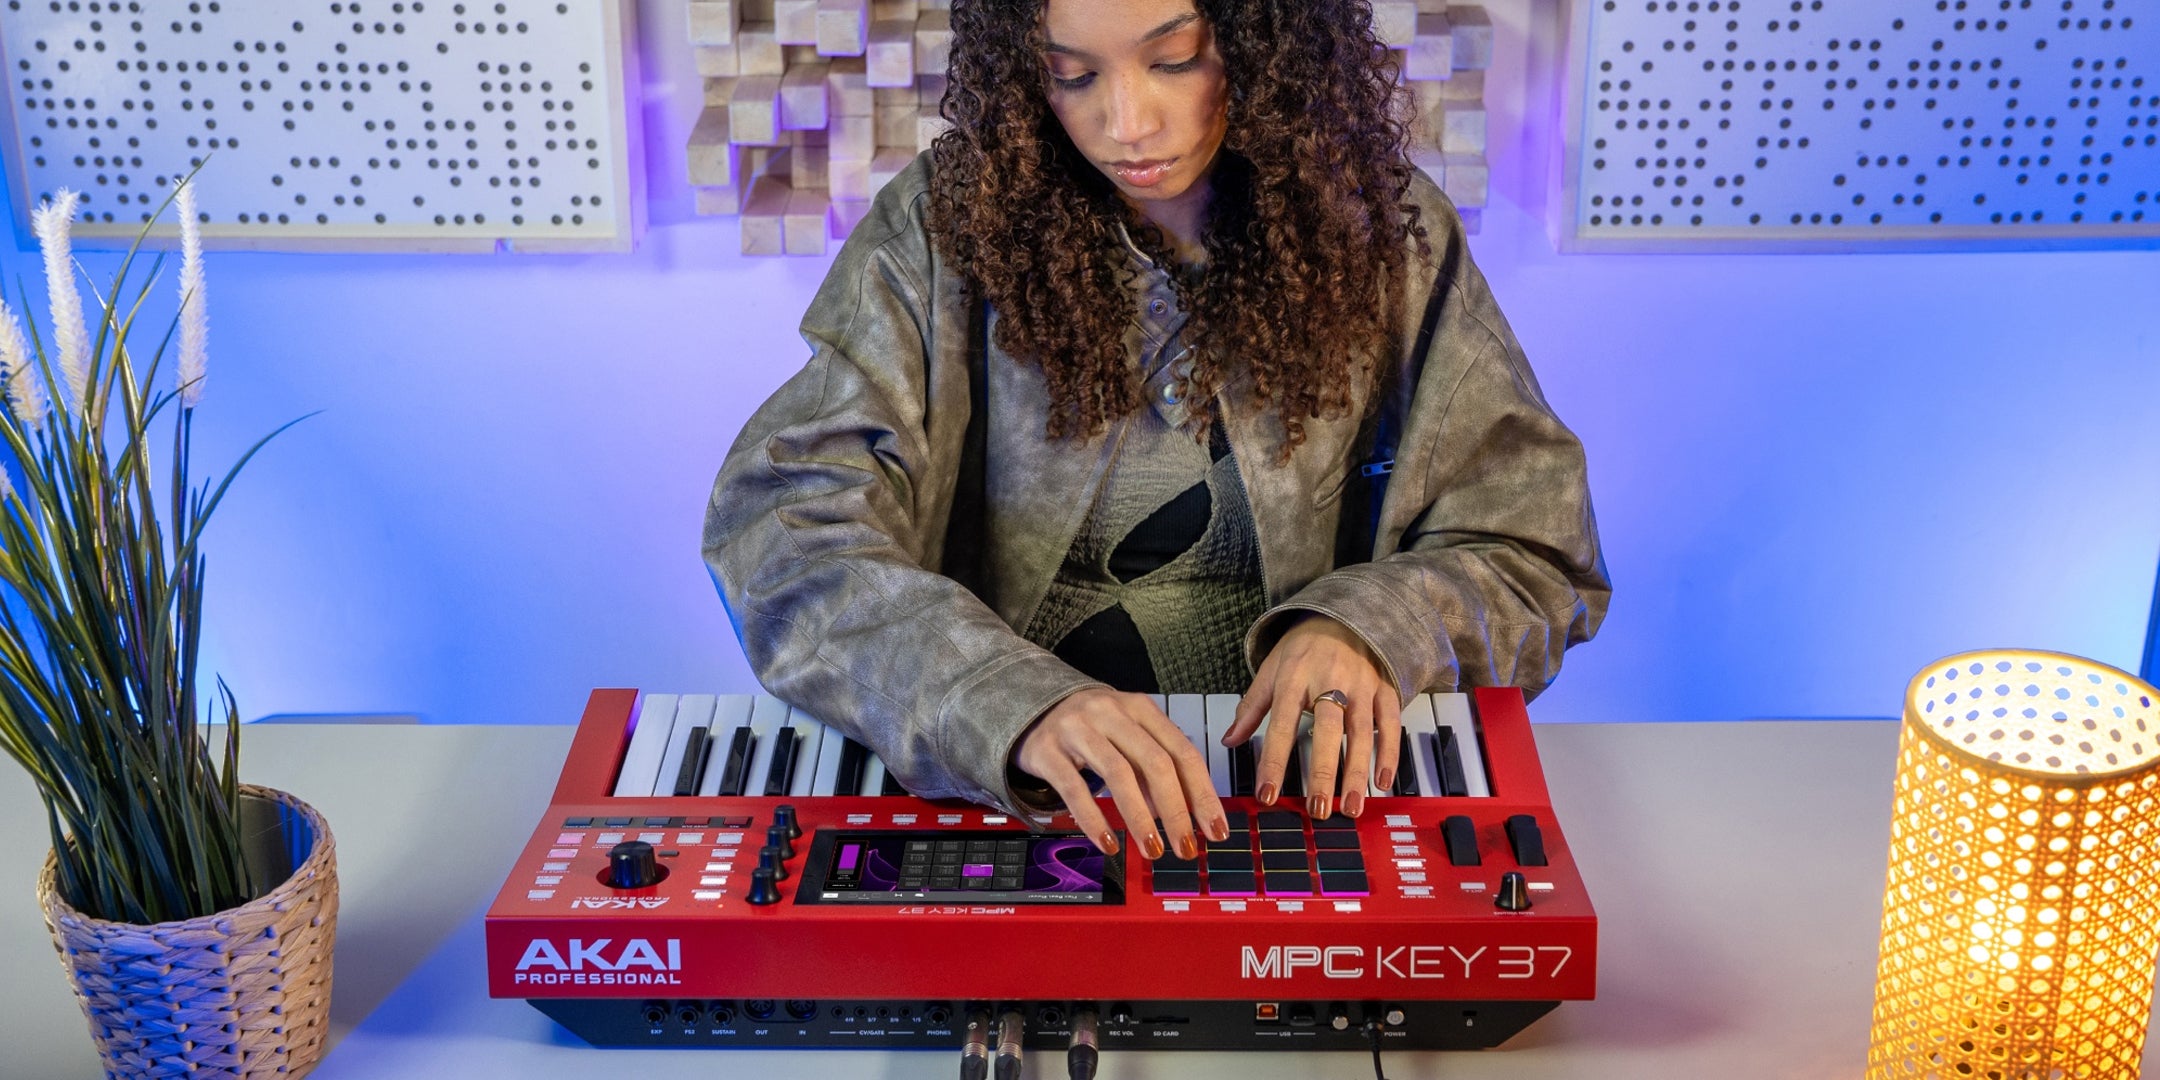 The Akai MPC Key 37 in use at home